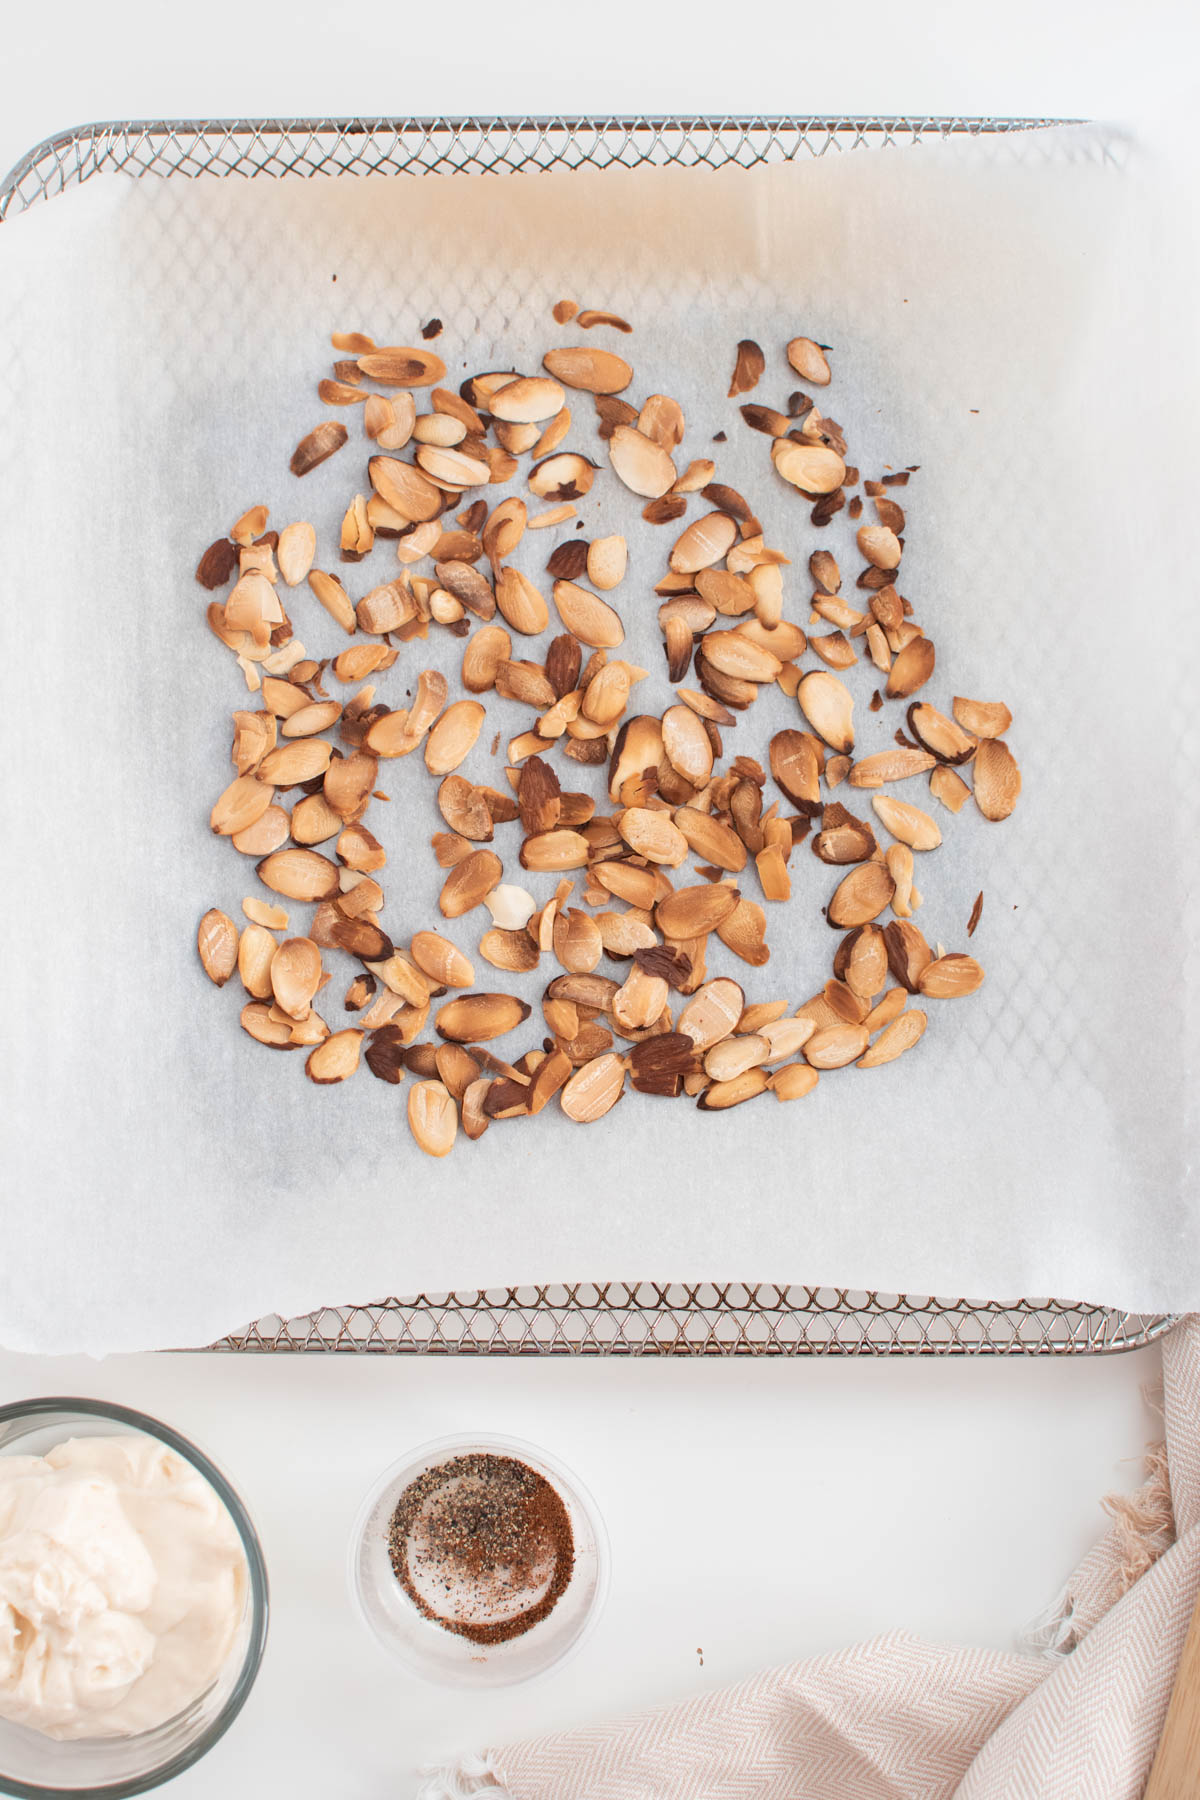 Small roasting pan with several toasted almonds on parchment paper.